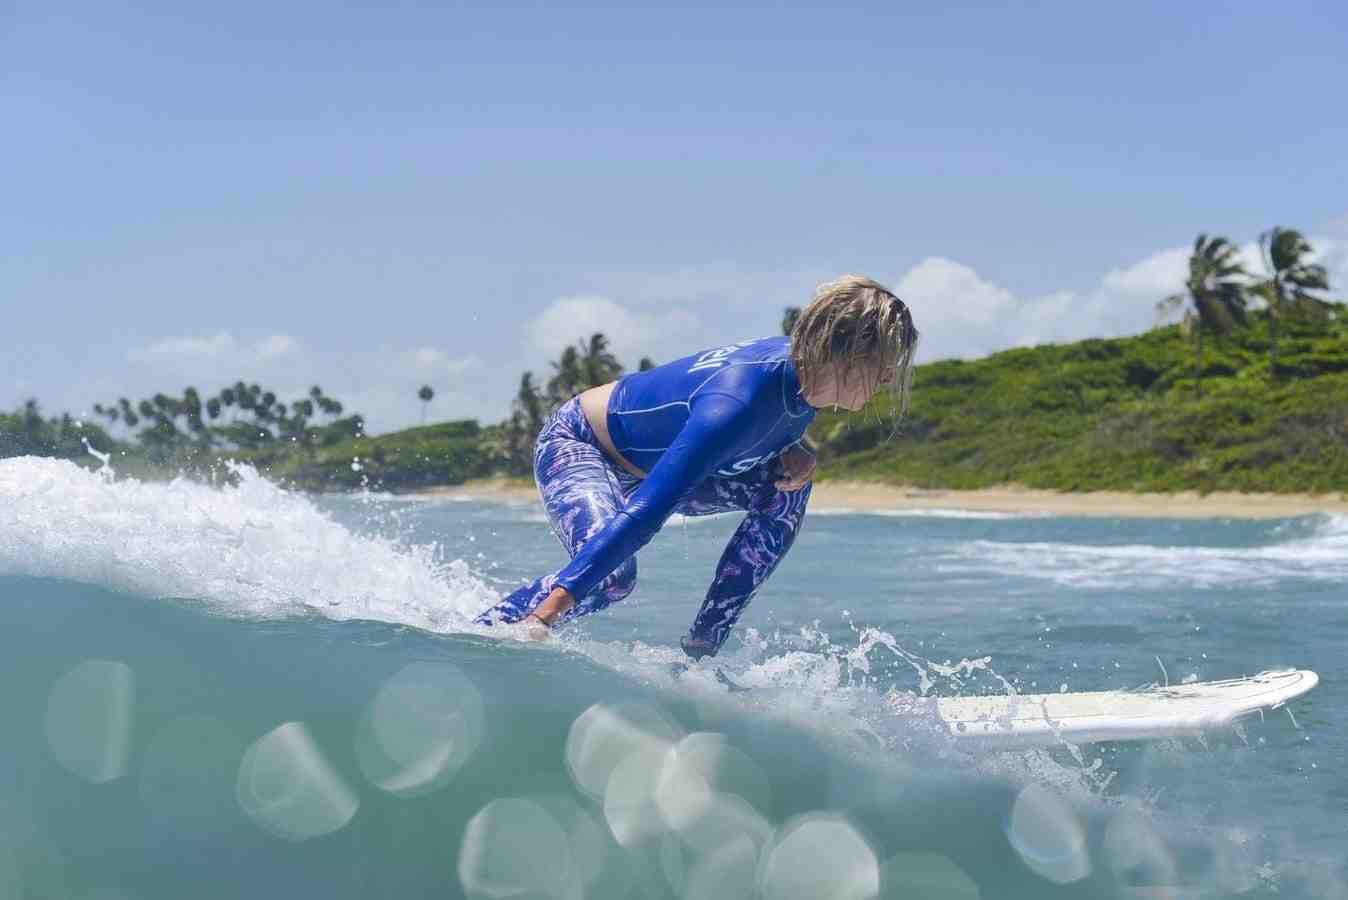 Why do surfers touch the wave?